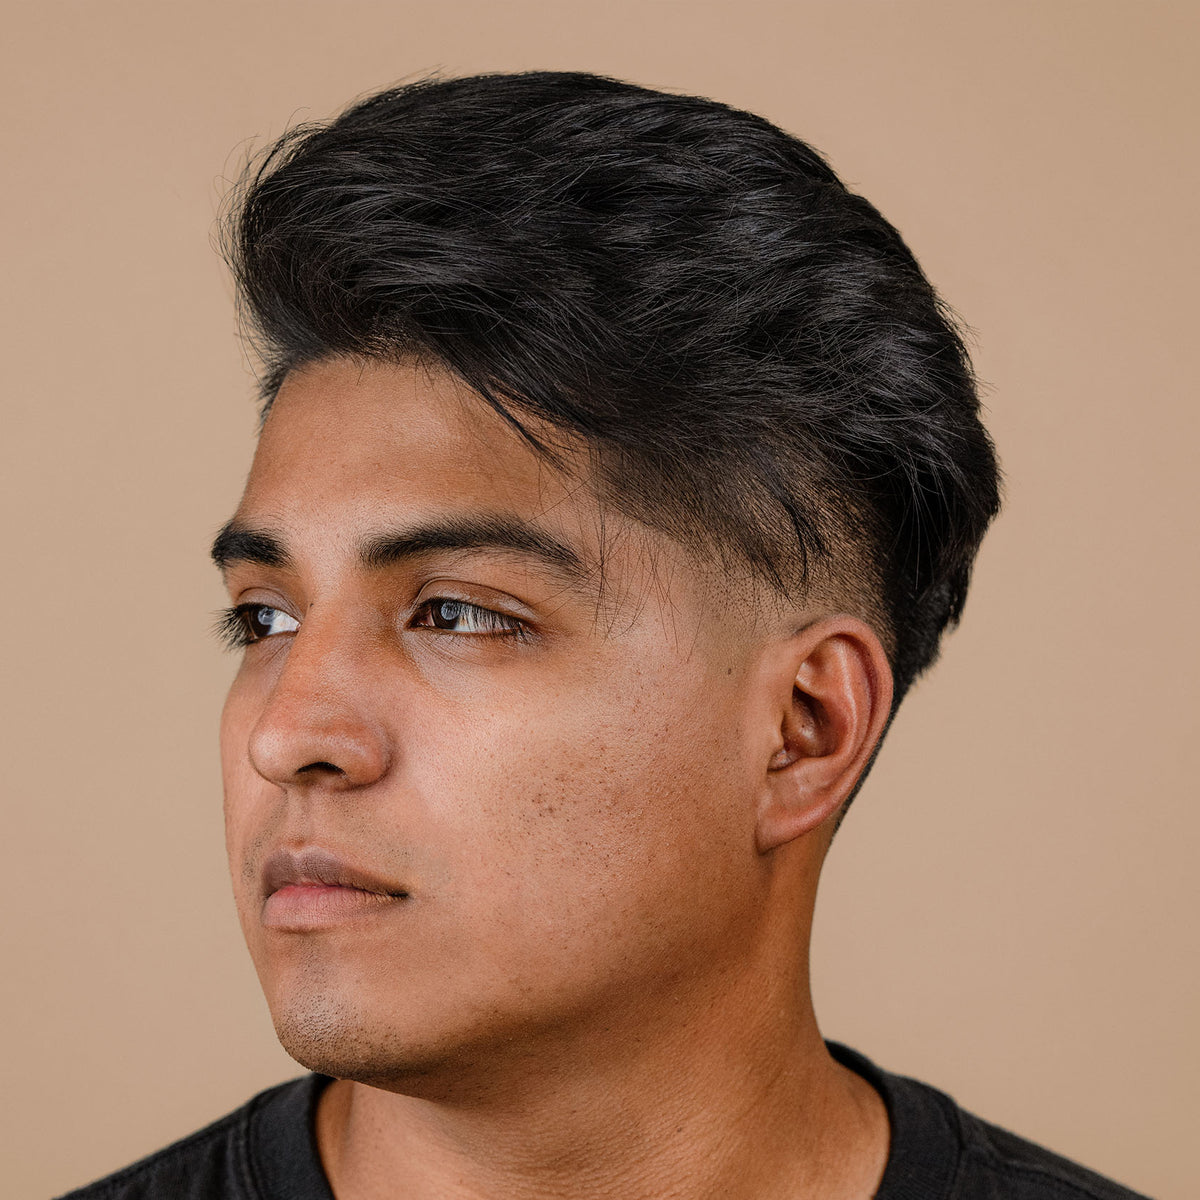 Man with hair styled with Suavecito Texturizing Powder